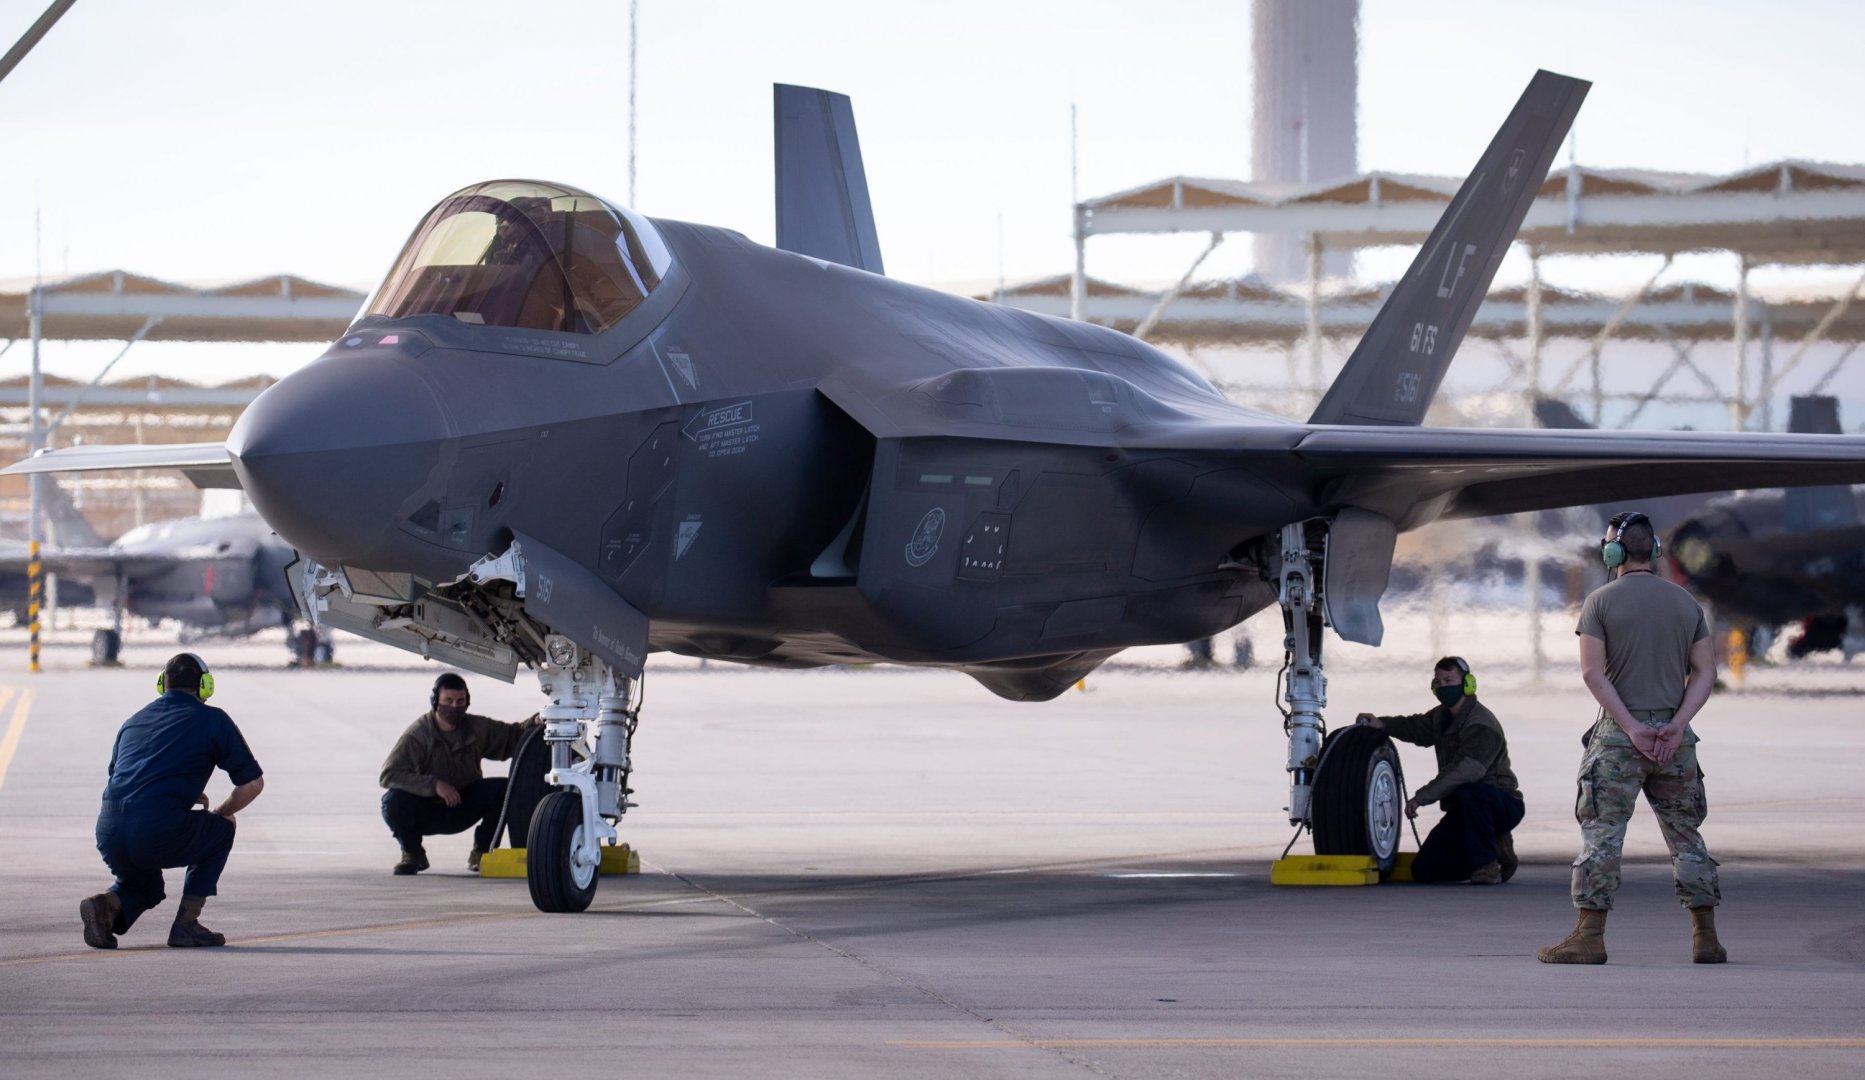 Turkey to recoup money paid to US for F-35s ‘one way or another’